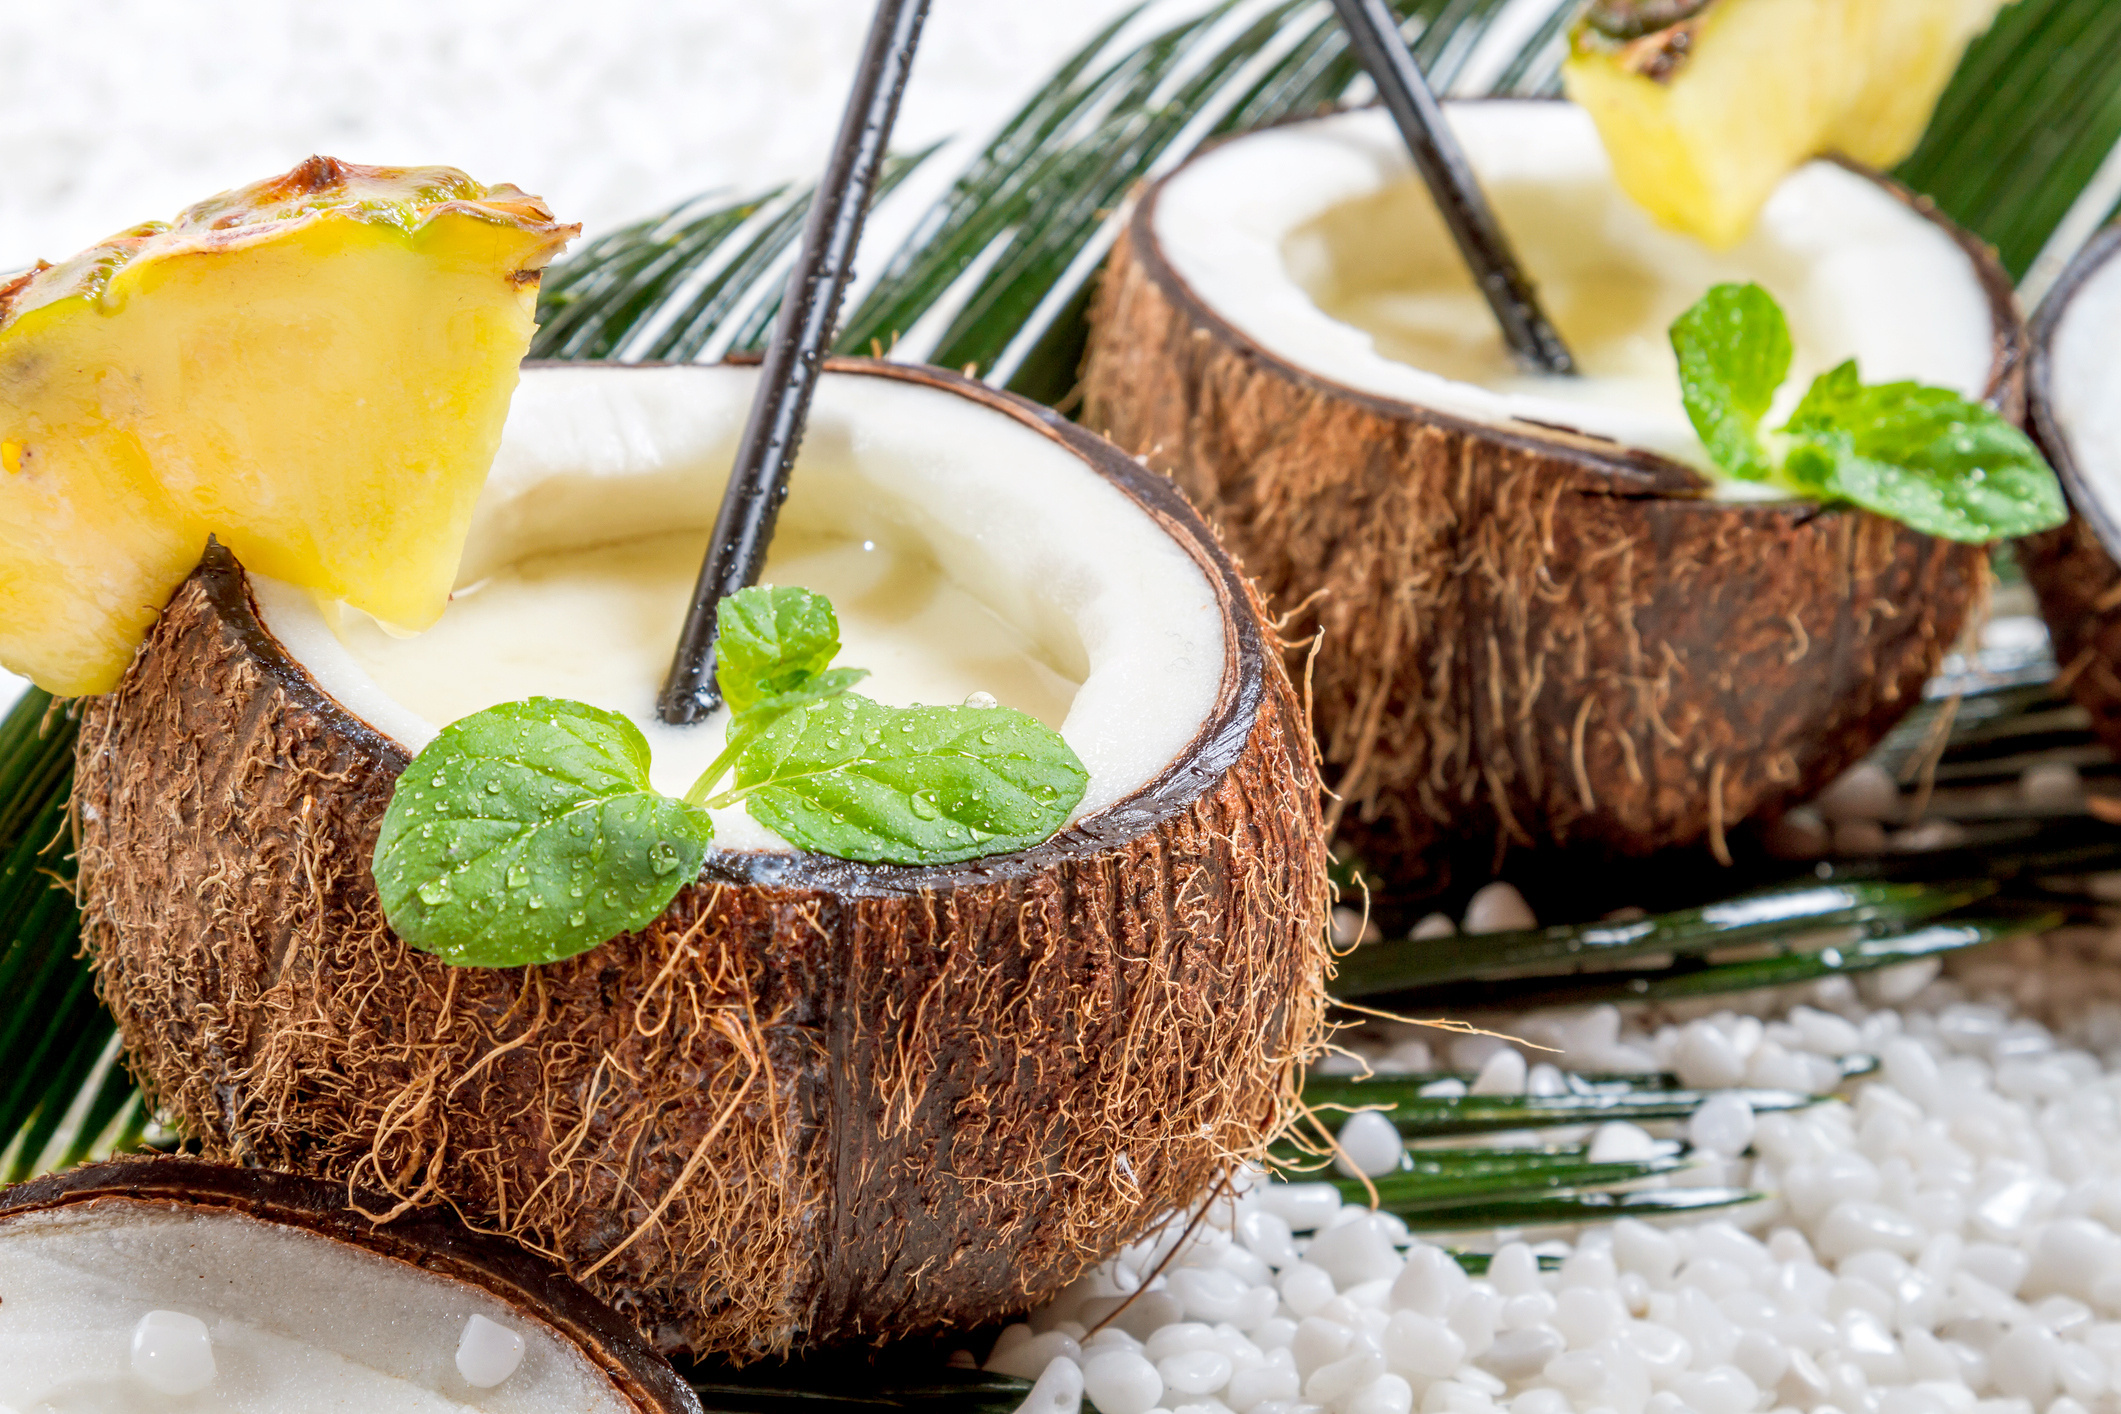 Coconut: Grown in more than 80 countries, Natural foods. 2130x1420 HD Wallpaper.